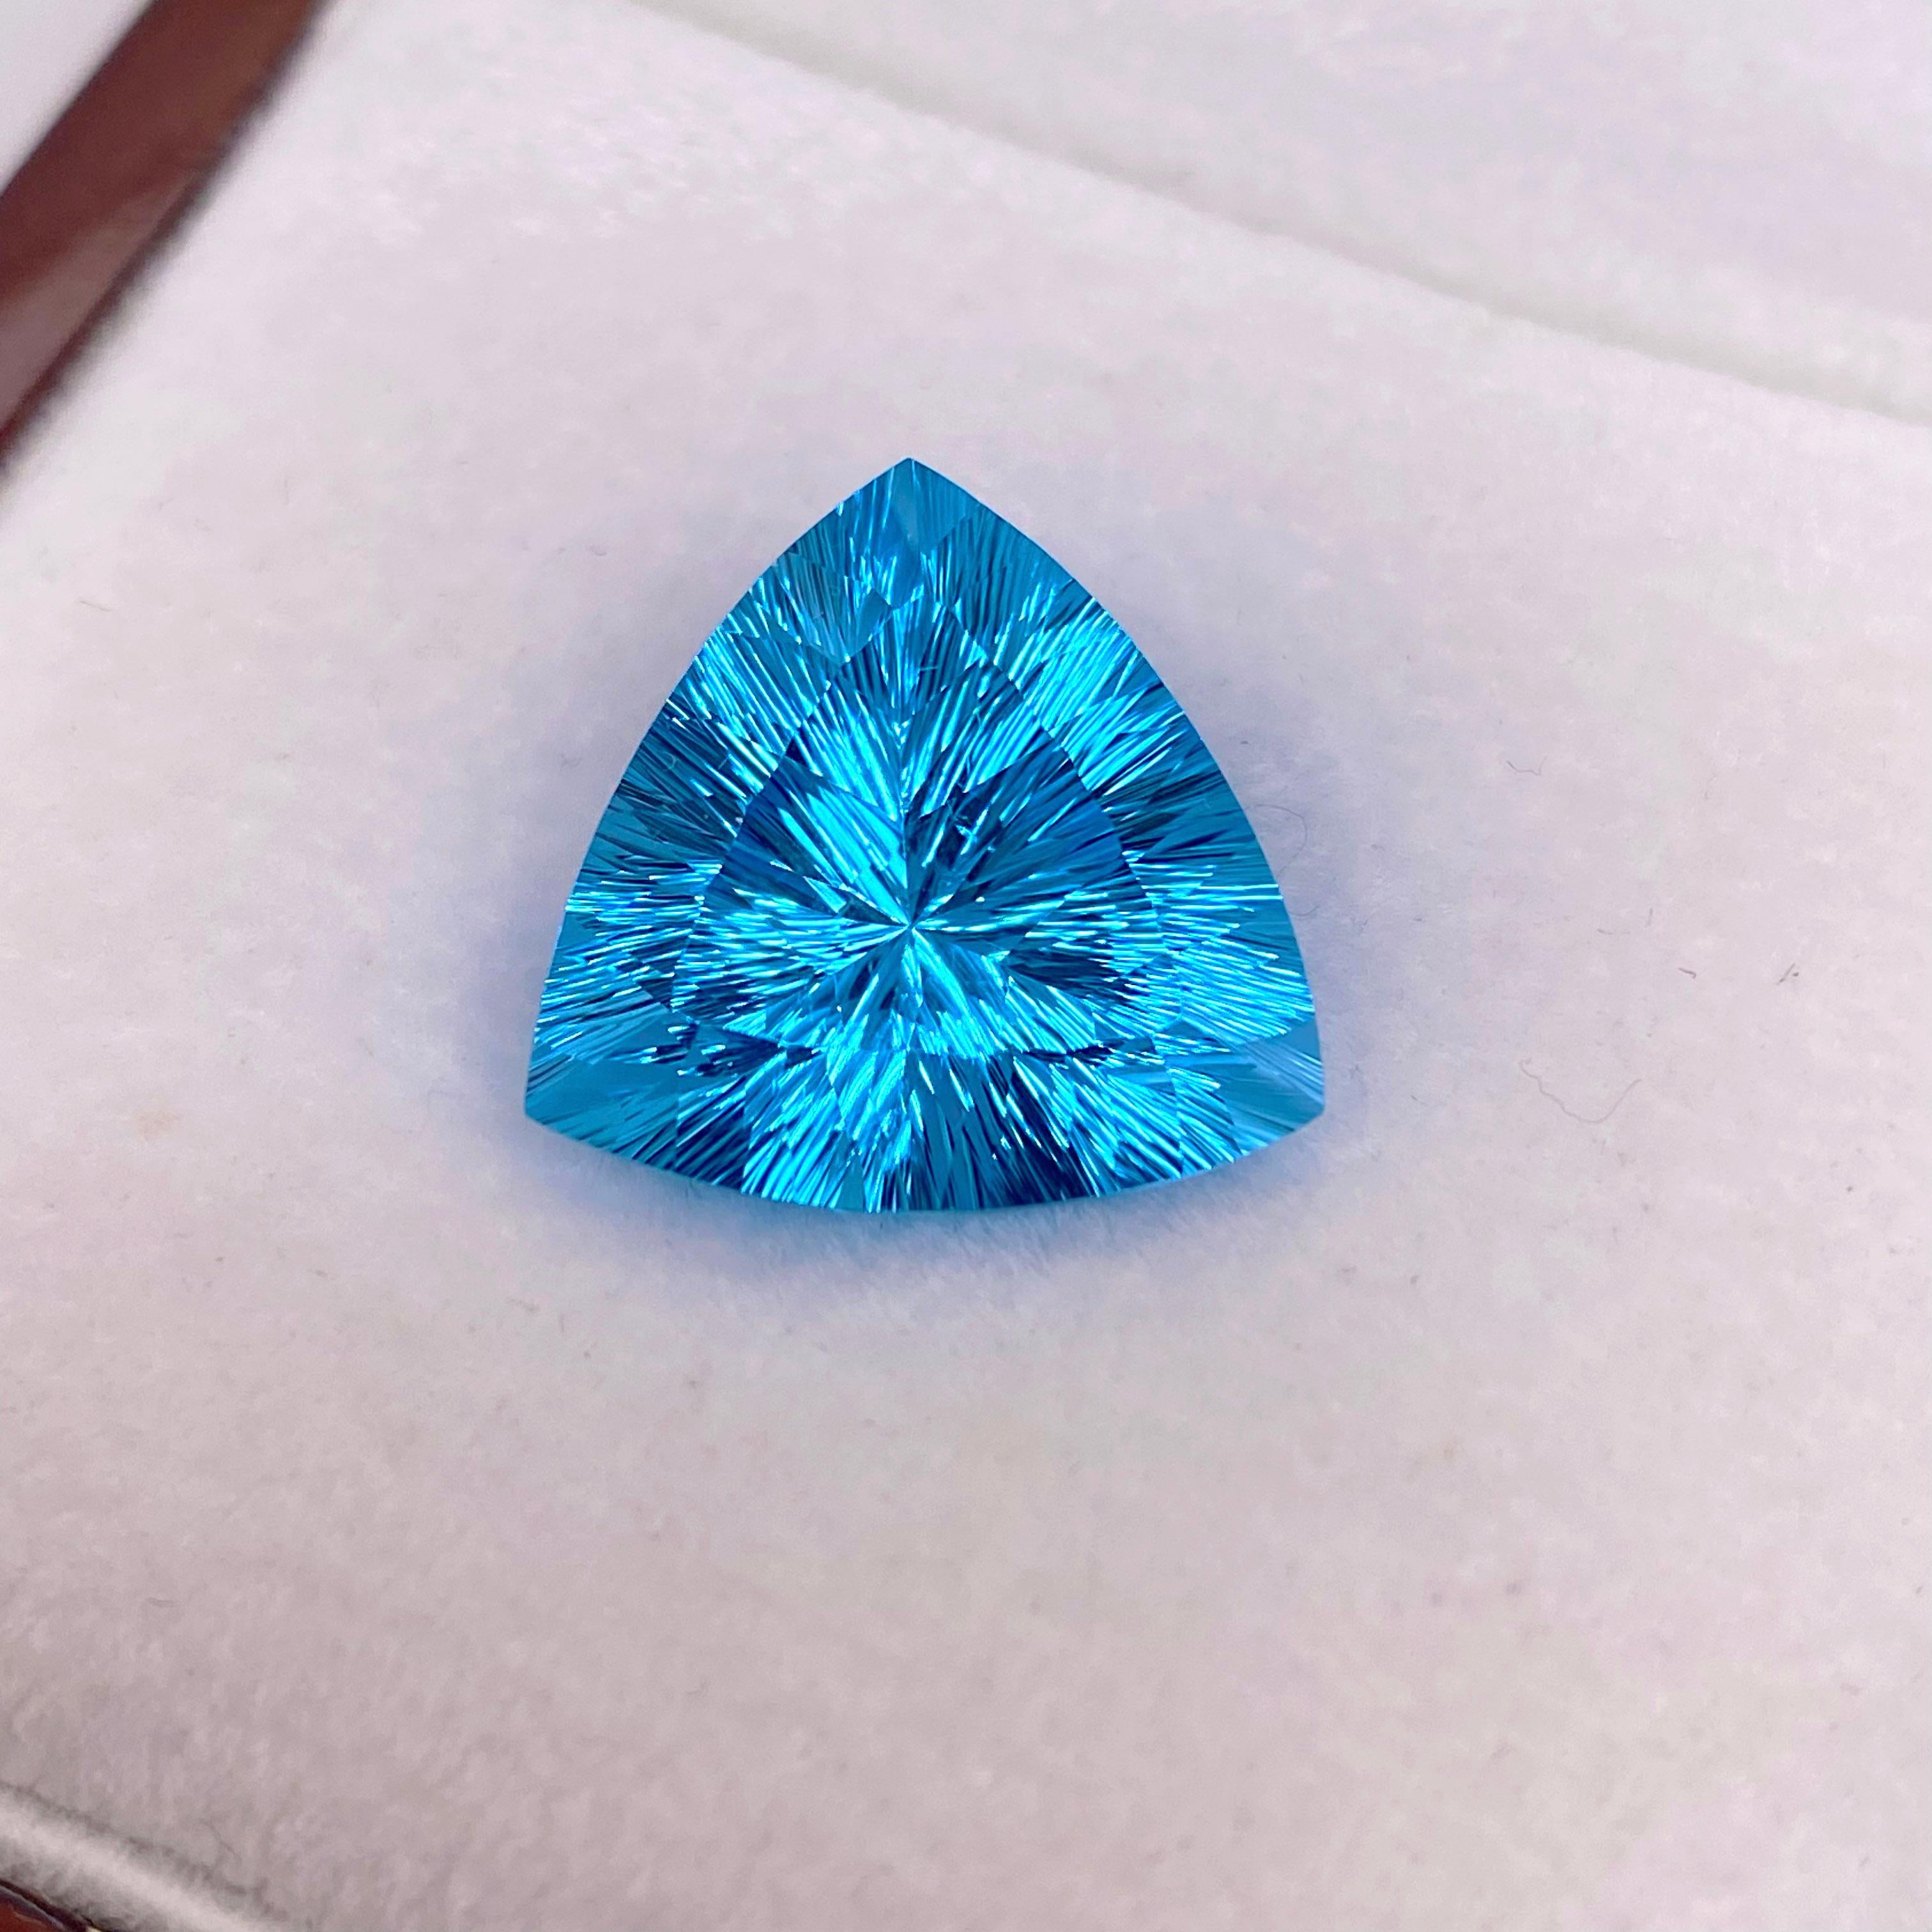 This Brazilian Fantasy Gemstone weighs 18.13 carats and was very carefully cut by a well known cutter in Brazil. The London Blue Topaz is so sleek and has amazing reflections. The color of the topaz is a gorgeous bright, vibrant color and the sleek